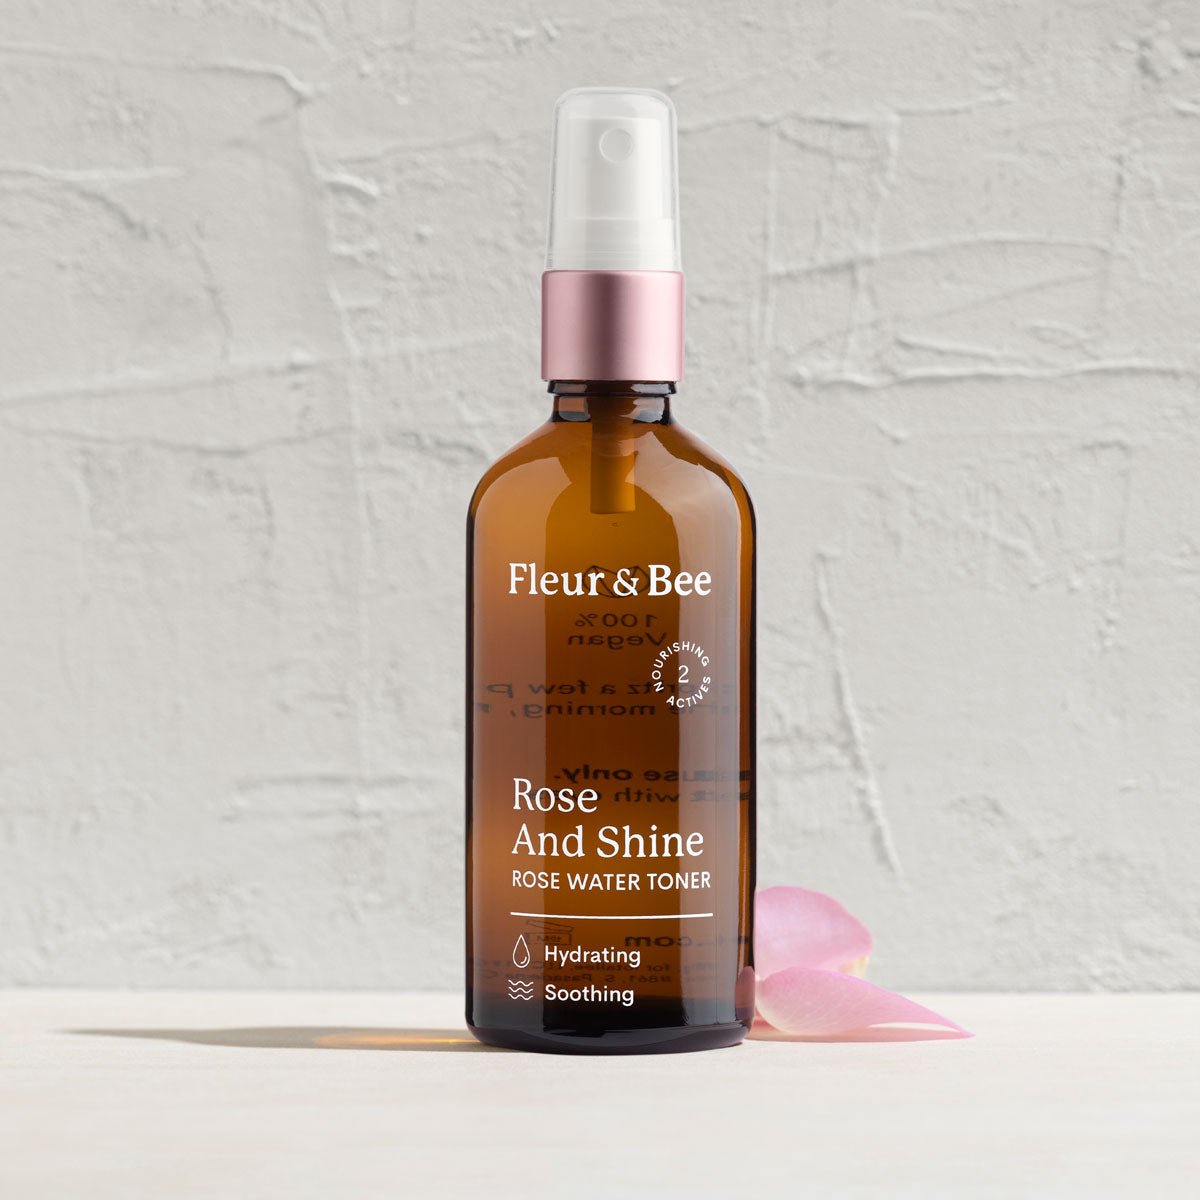 Rose and Shine, a natural rose water toner by Fleur & Bee